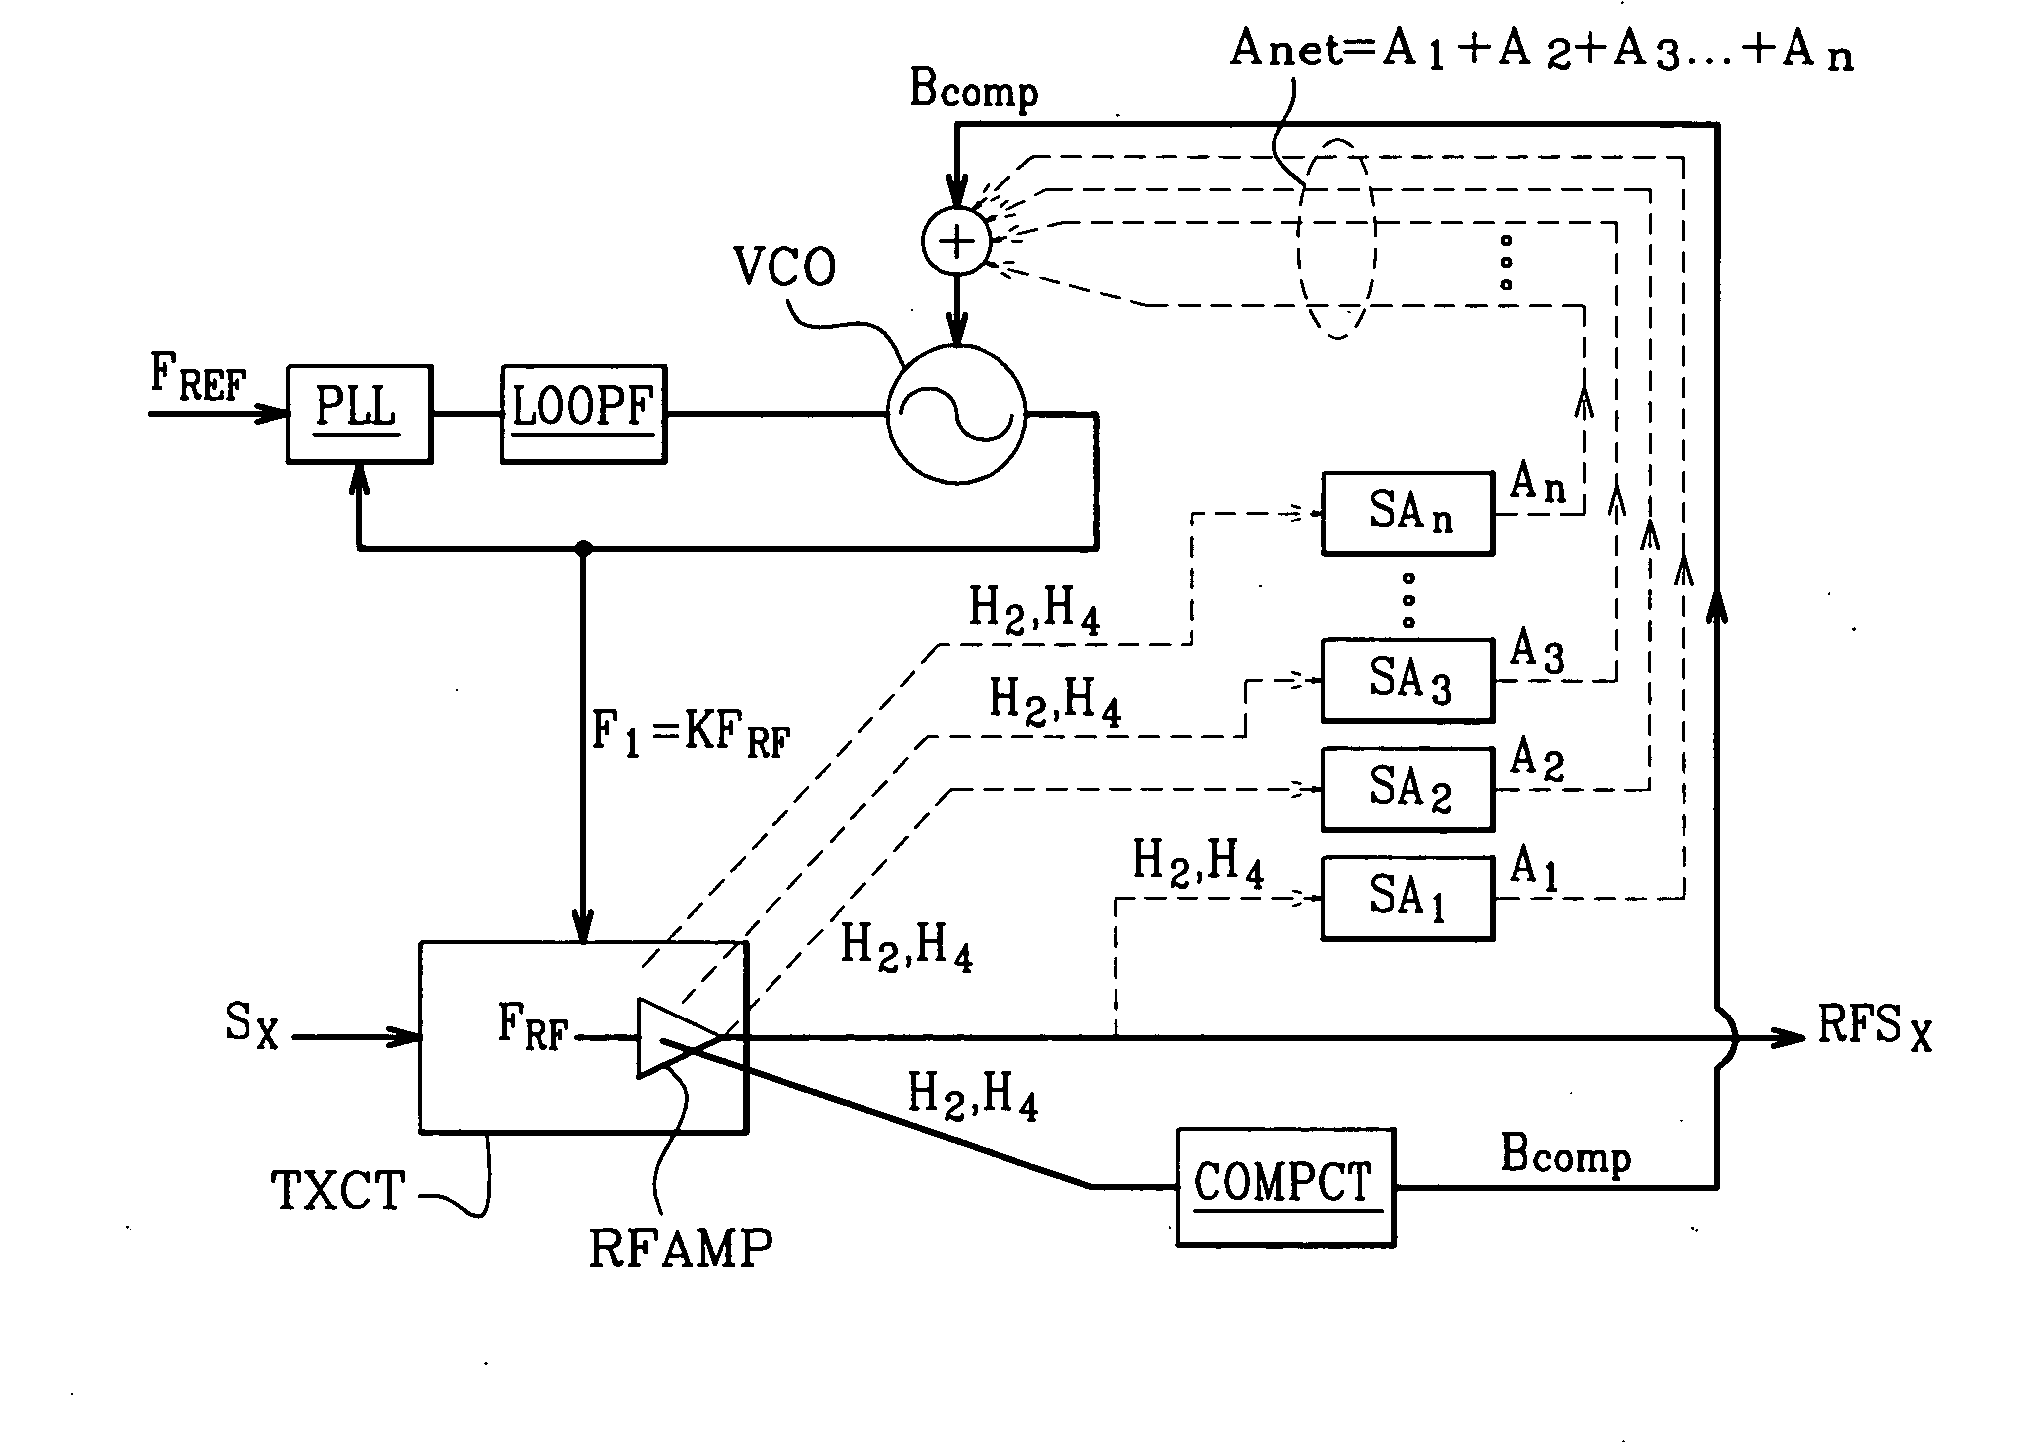 Voltage-controlled oscillator comprising a circuit for compensating frequency pulling